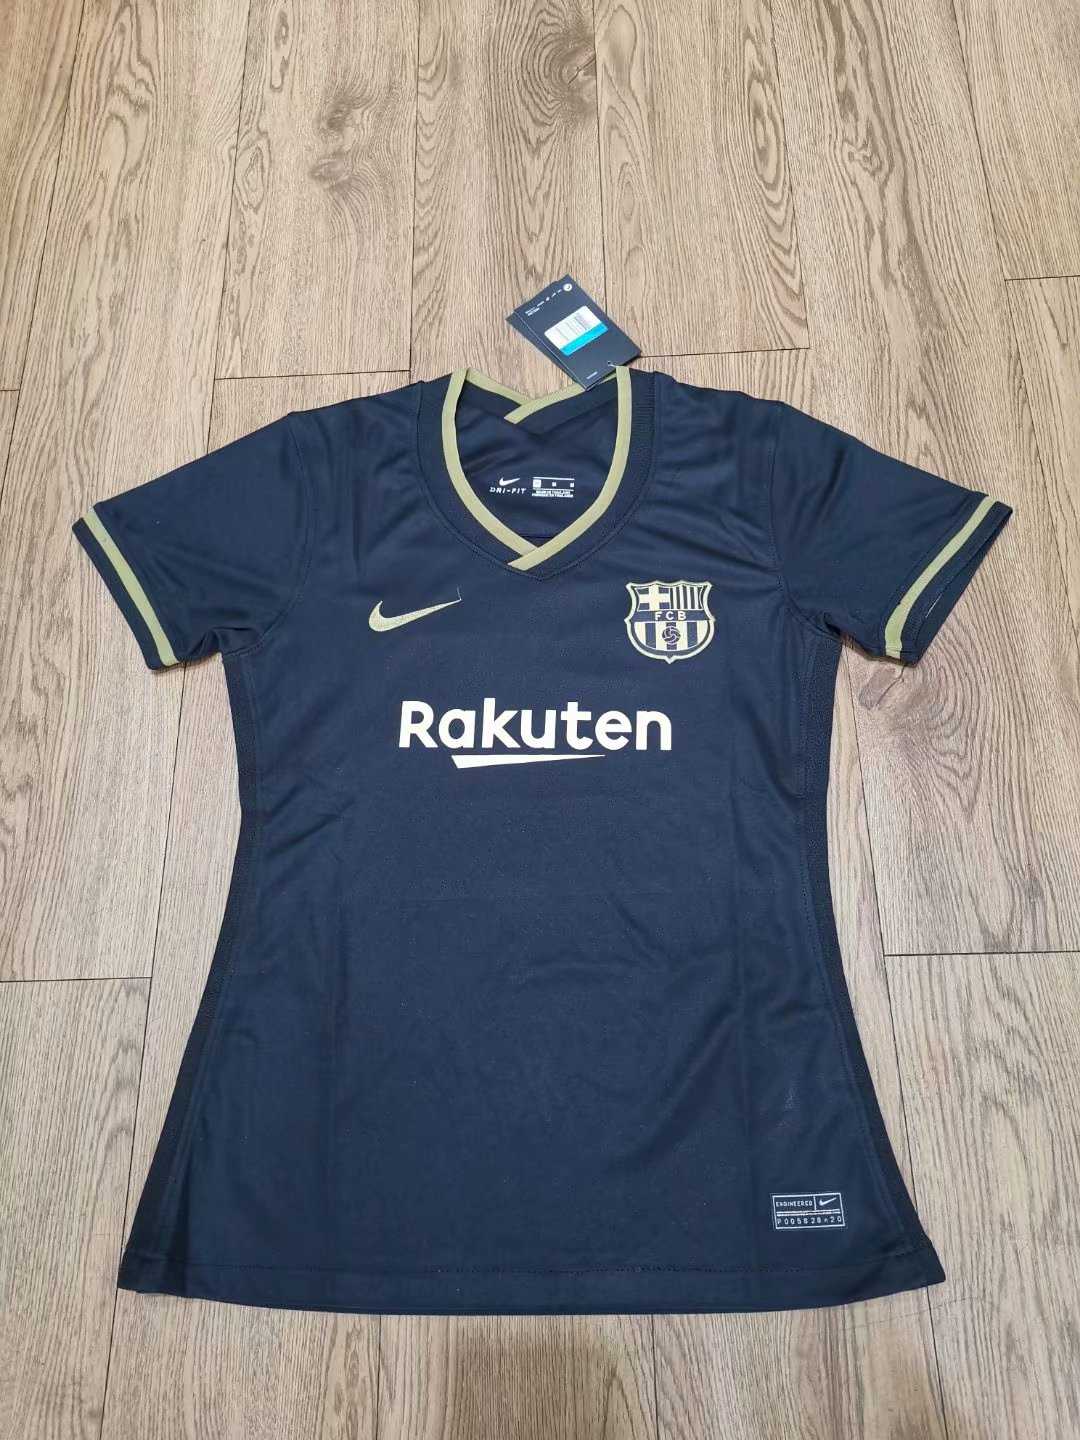 20/21 Barcelona Away Black Jersey Women's - Click Image to Close